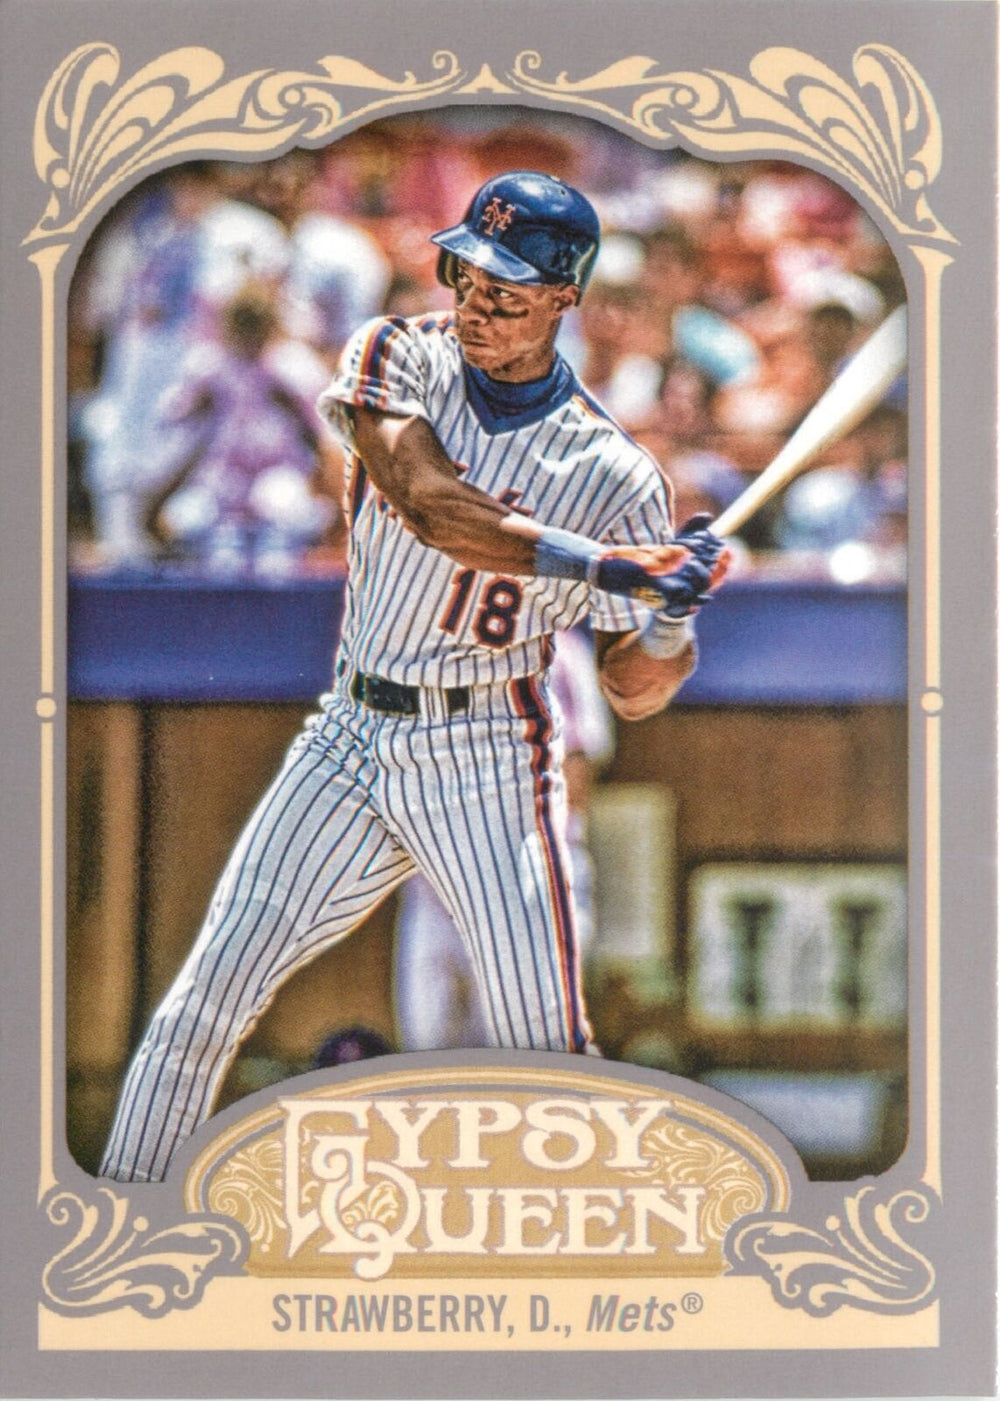 Darryl Strawberry 2012 Topps Gypsy Queen Series Mint Card #245